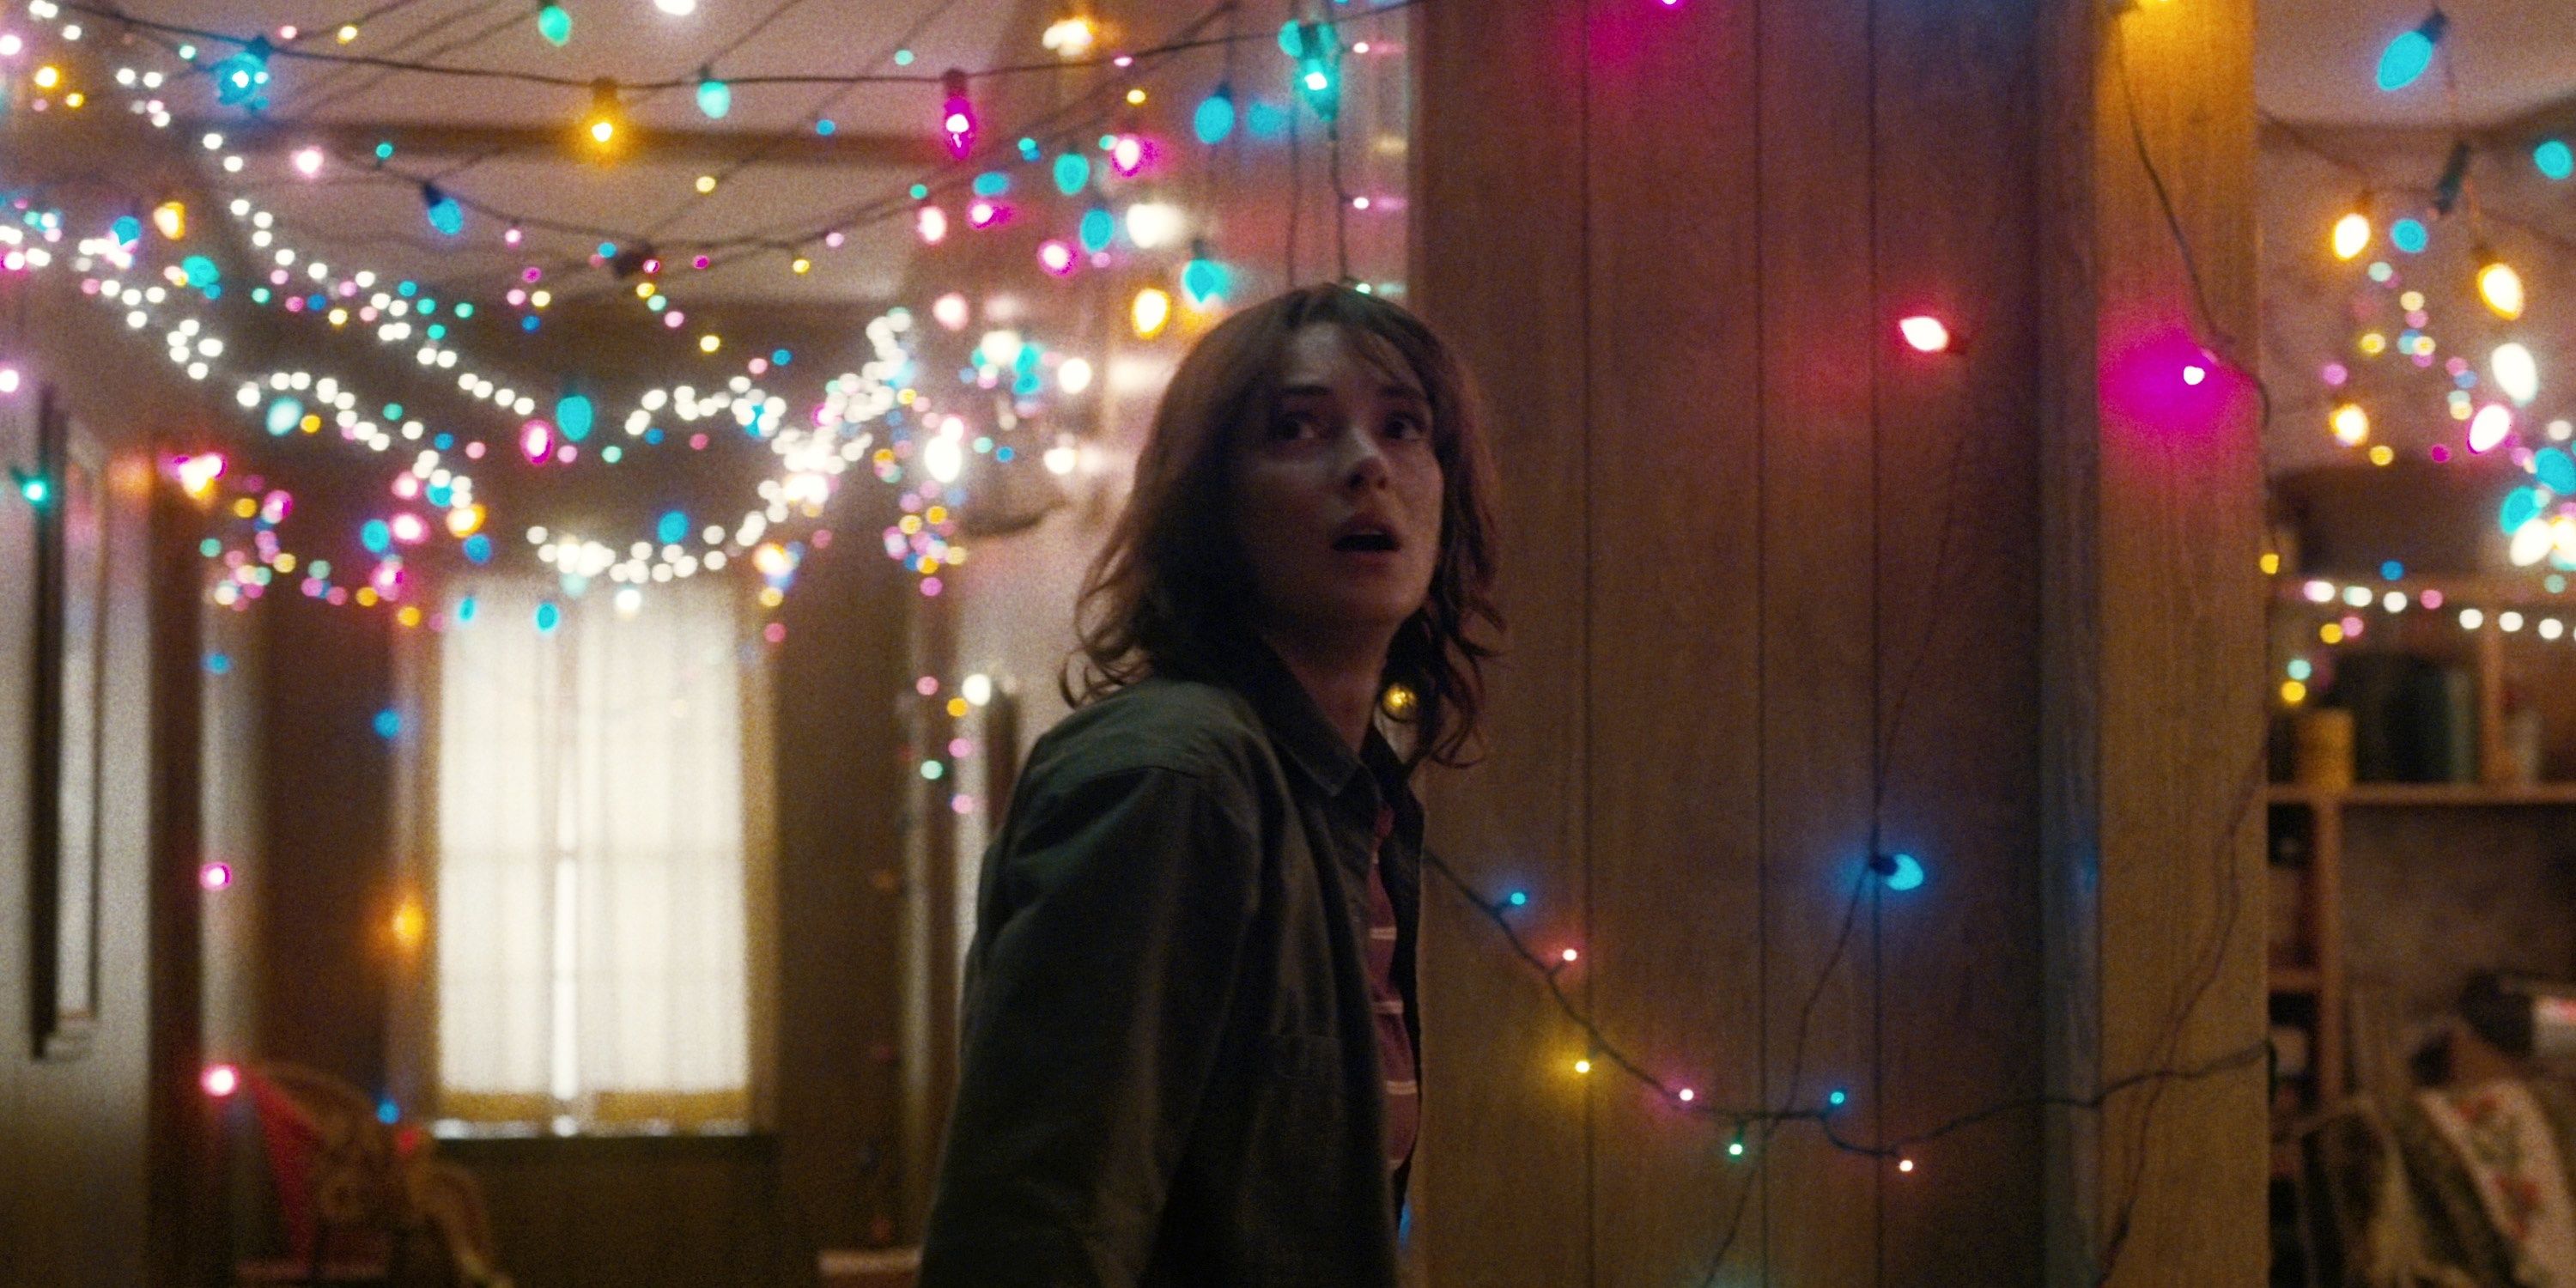 Joyce Byers In Her House Filled With Christmas Lights